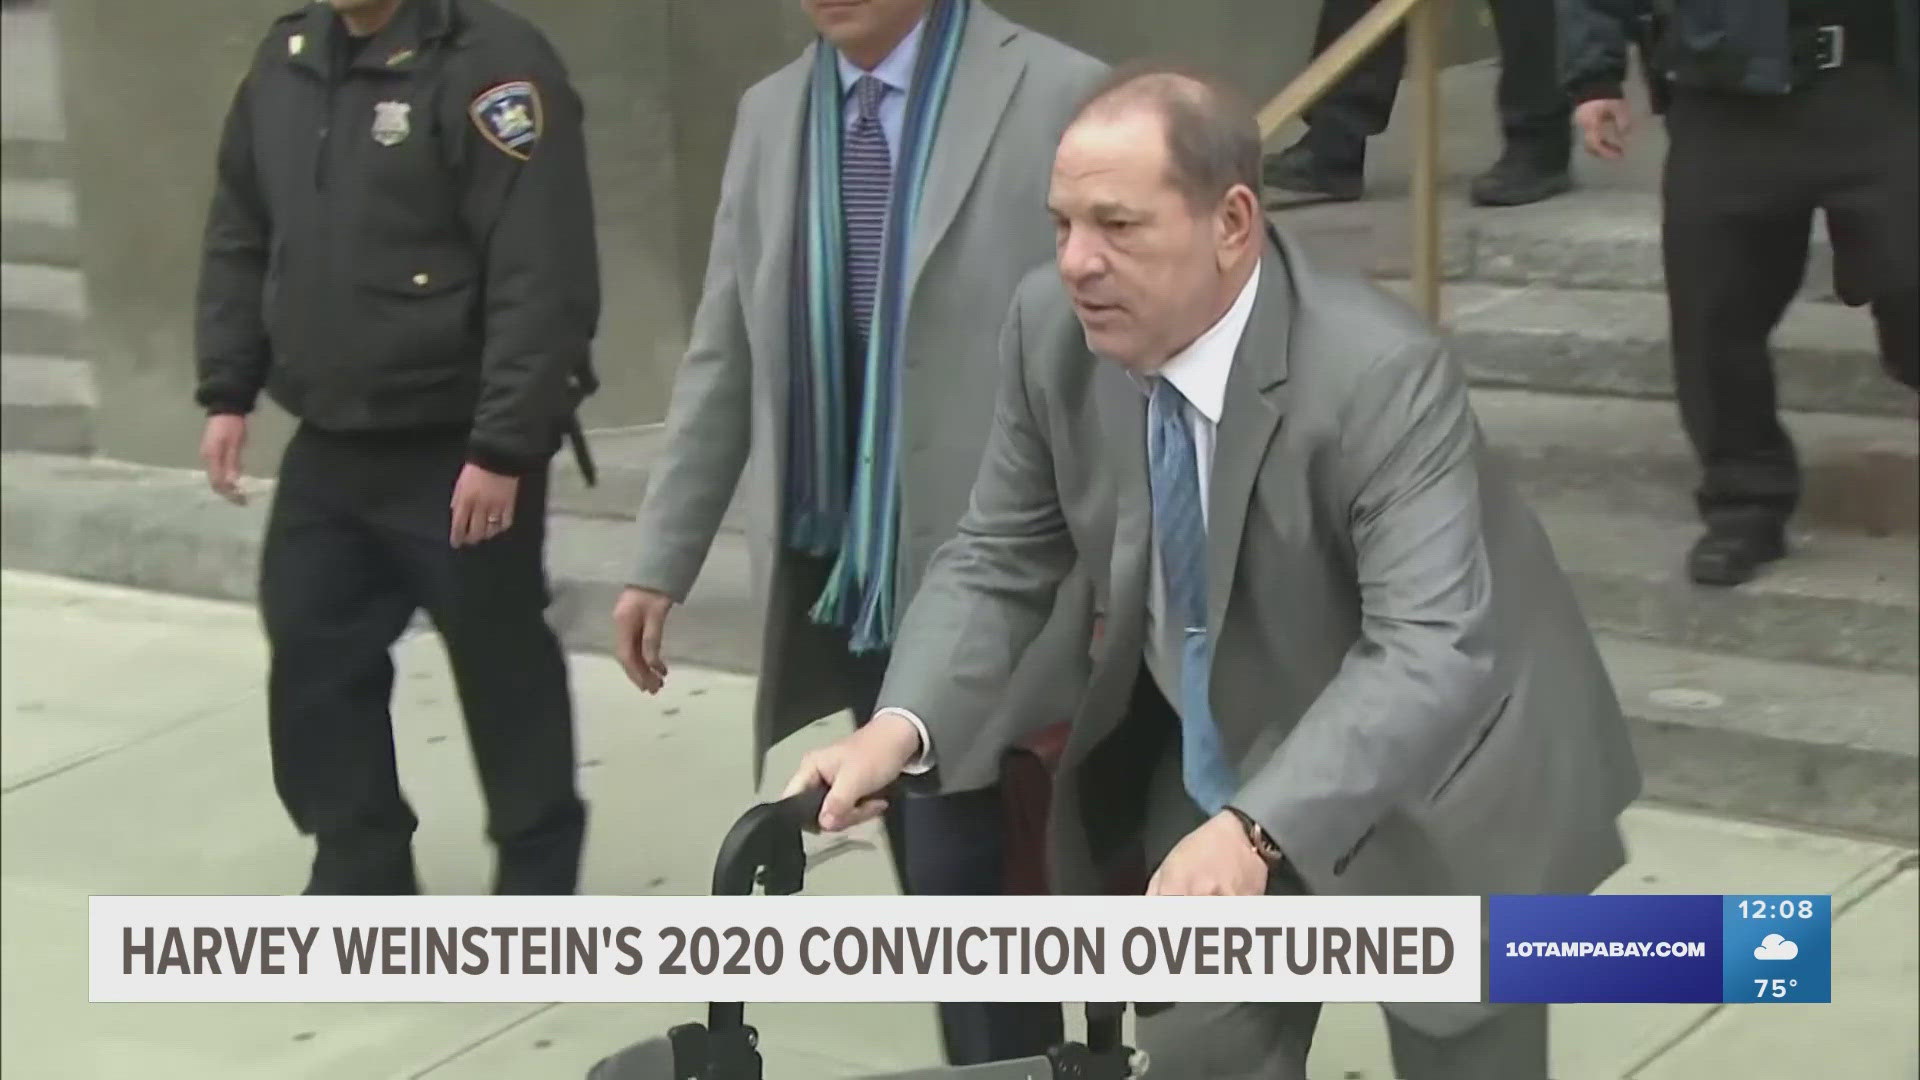 Weinstein will remain in jail for a separate rape conviction in California.